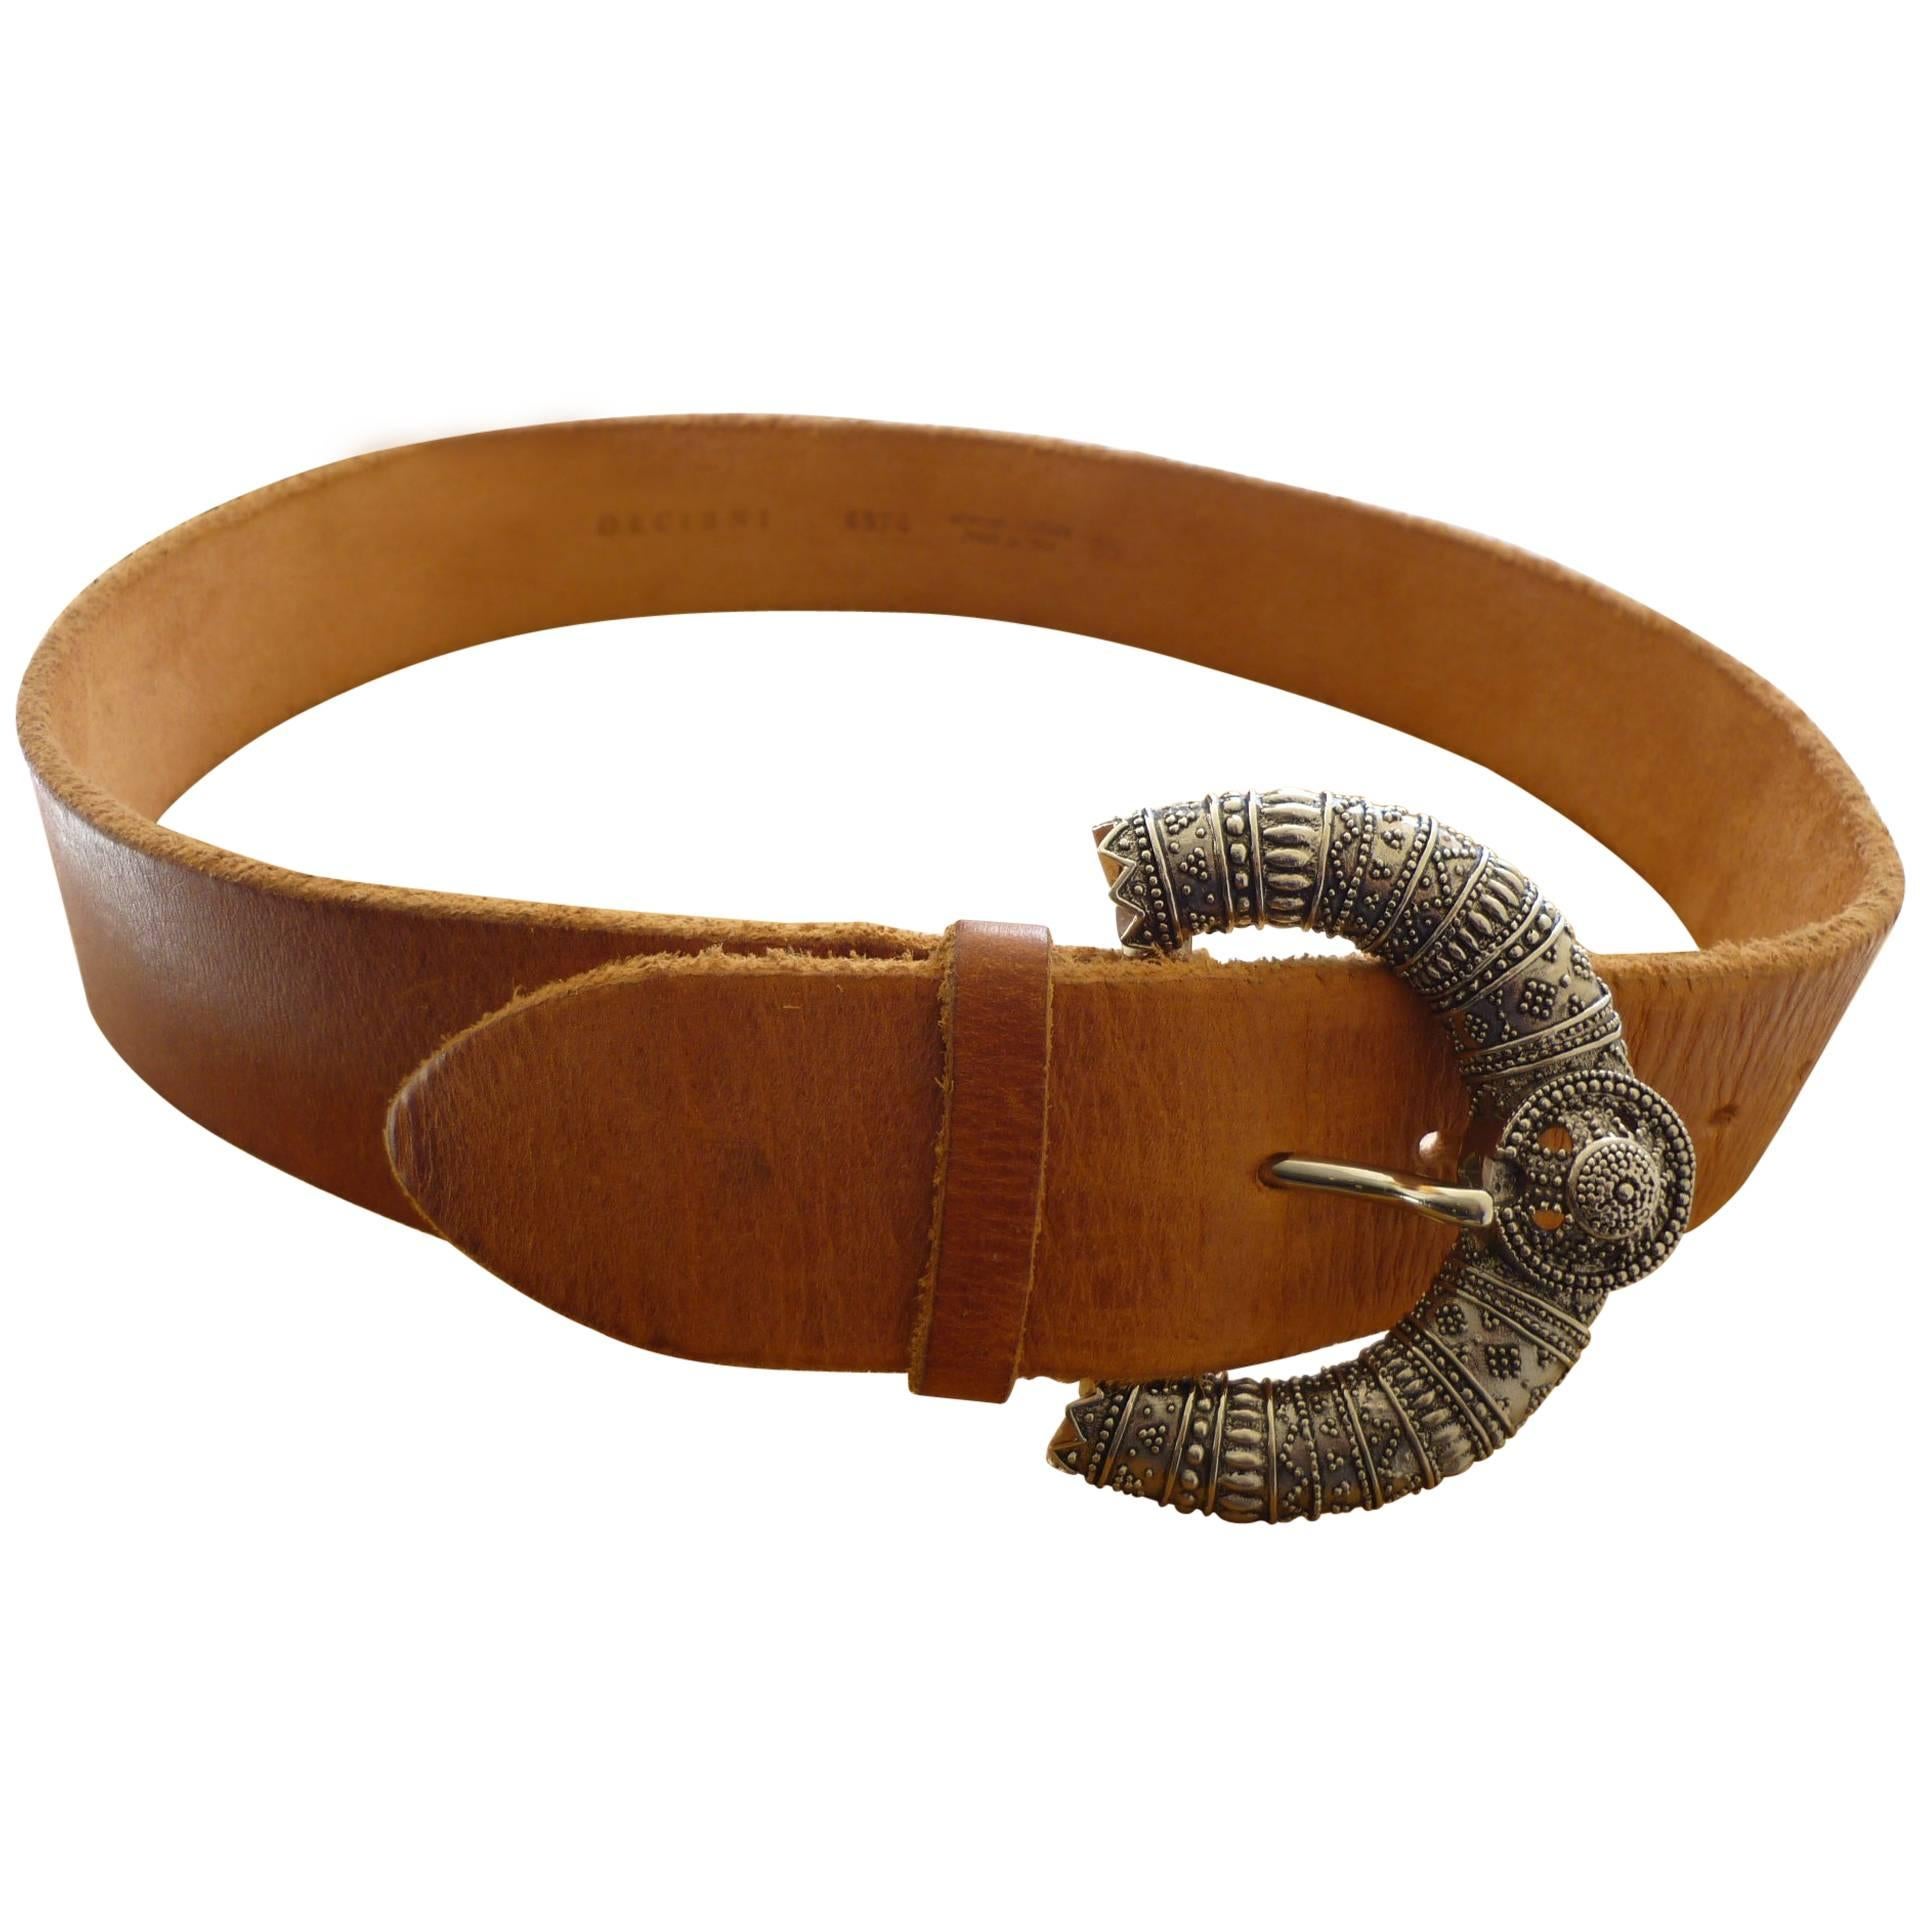 Orciani Tan Leather Belt with Impressive Silver Tone Buckle